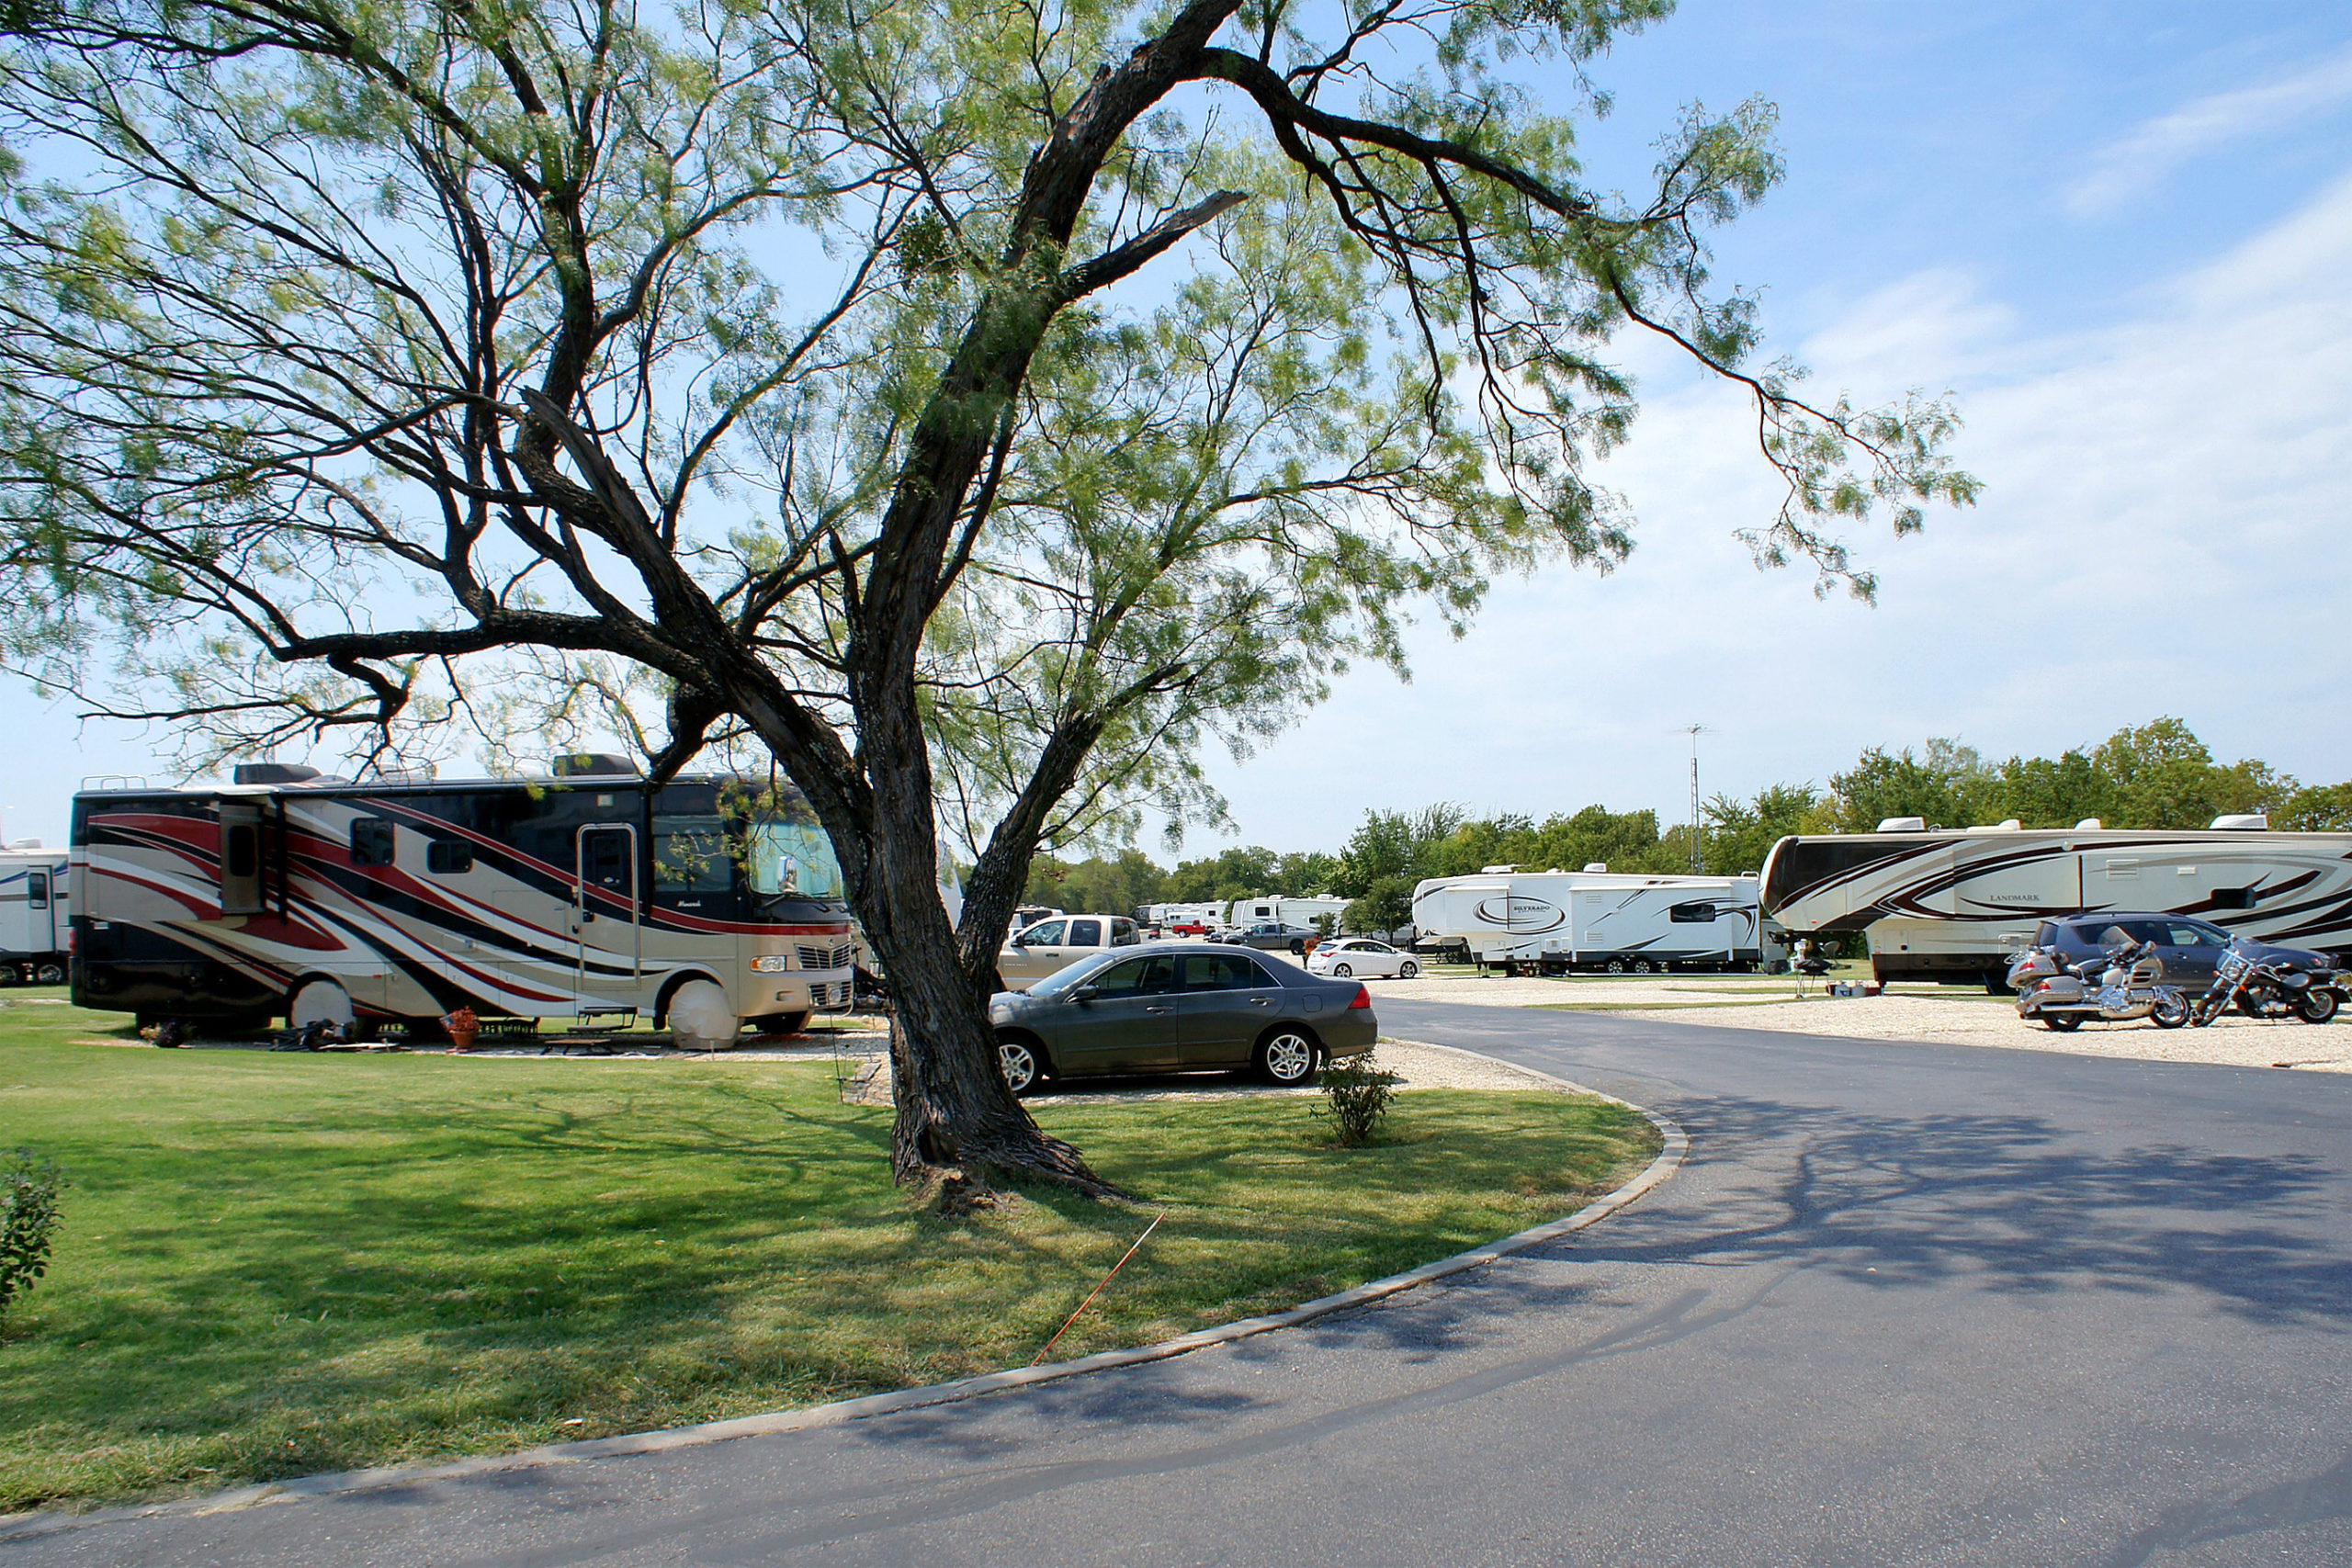 Shady Creek Rv Park & Storage : Shady Creek Rv Park And Storage Texas Campgrounds : Shady creek is located in dallas and has the perfect balance of country living and city accessibility.